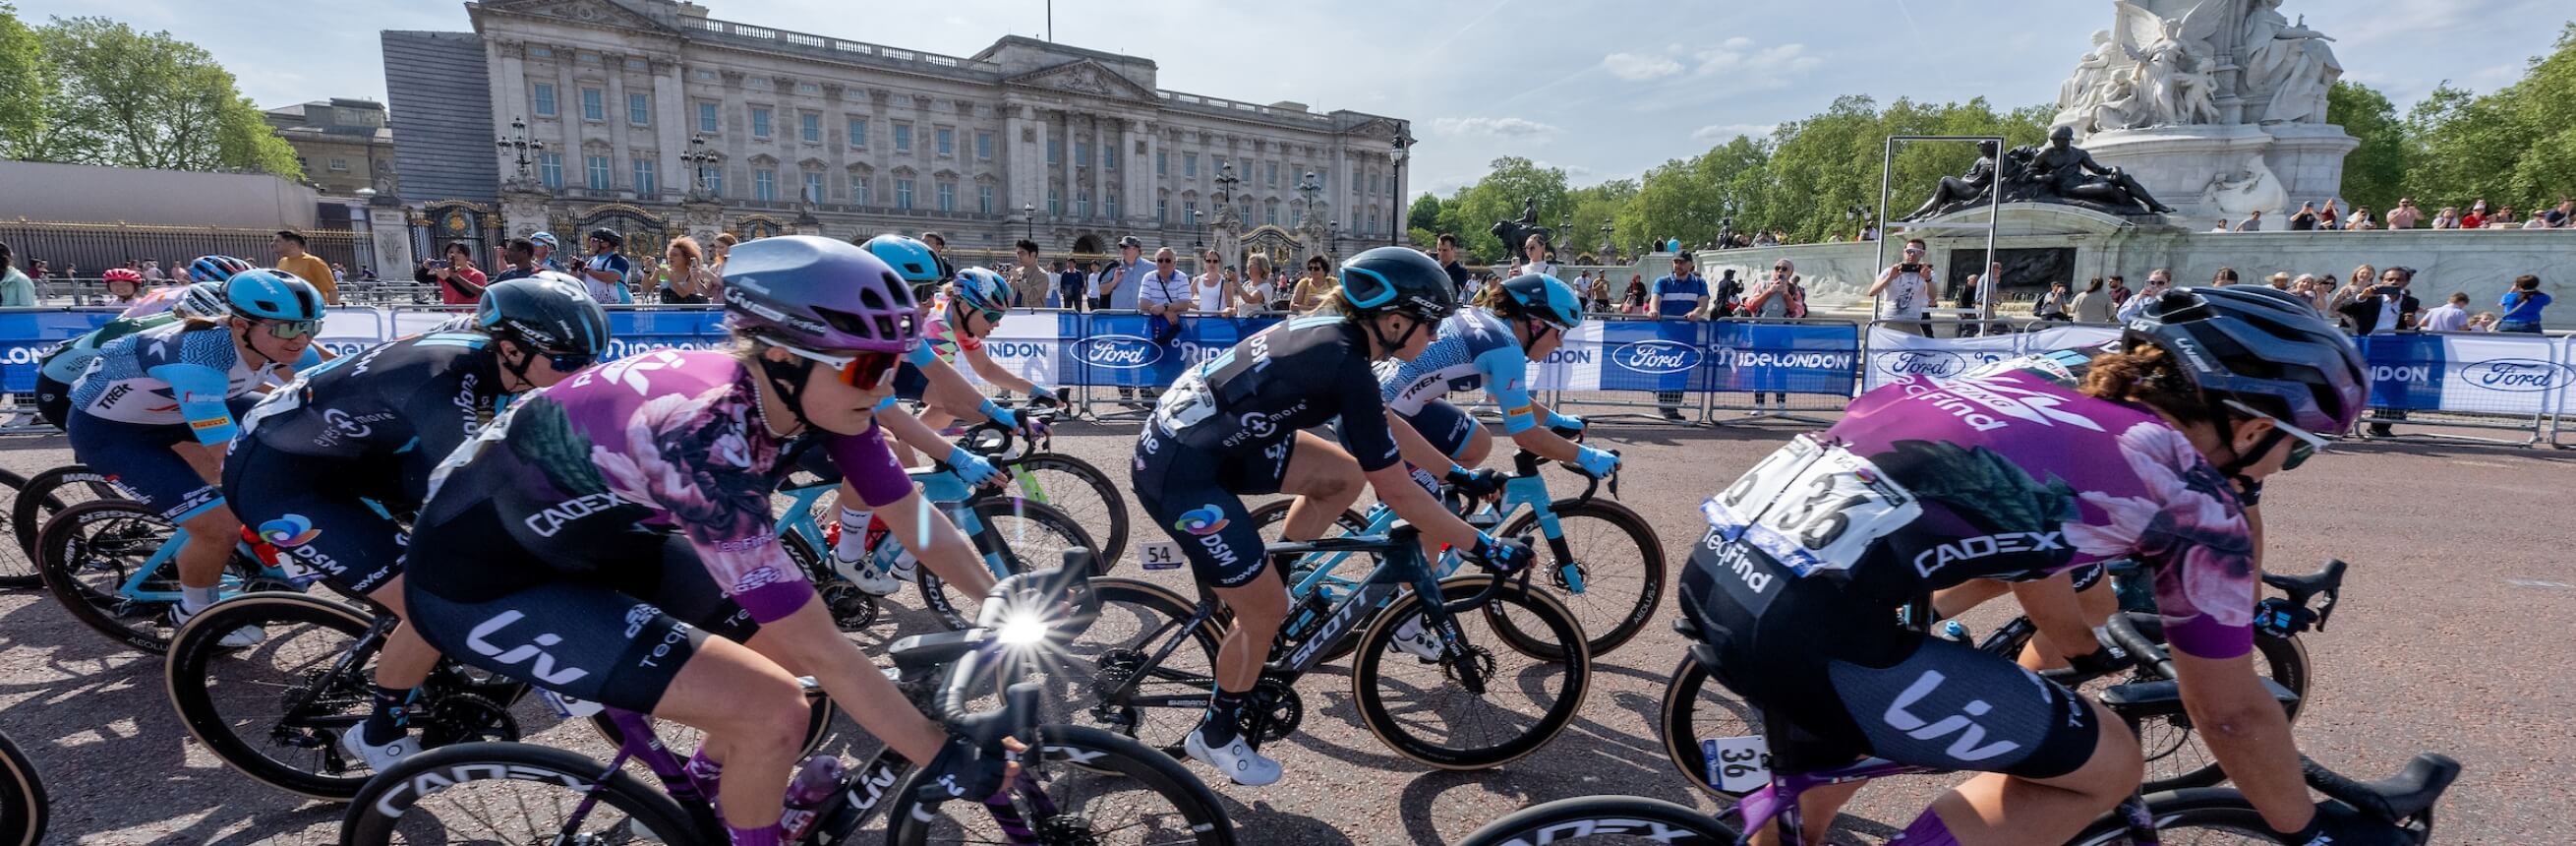 Classique riders taking a bend in front of Buckingham Palace